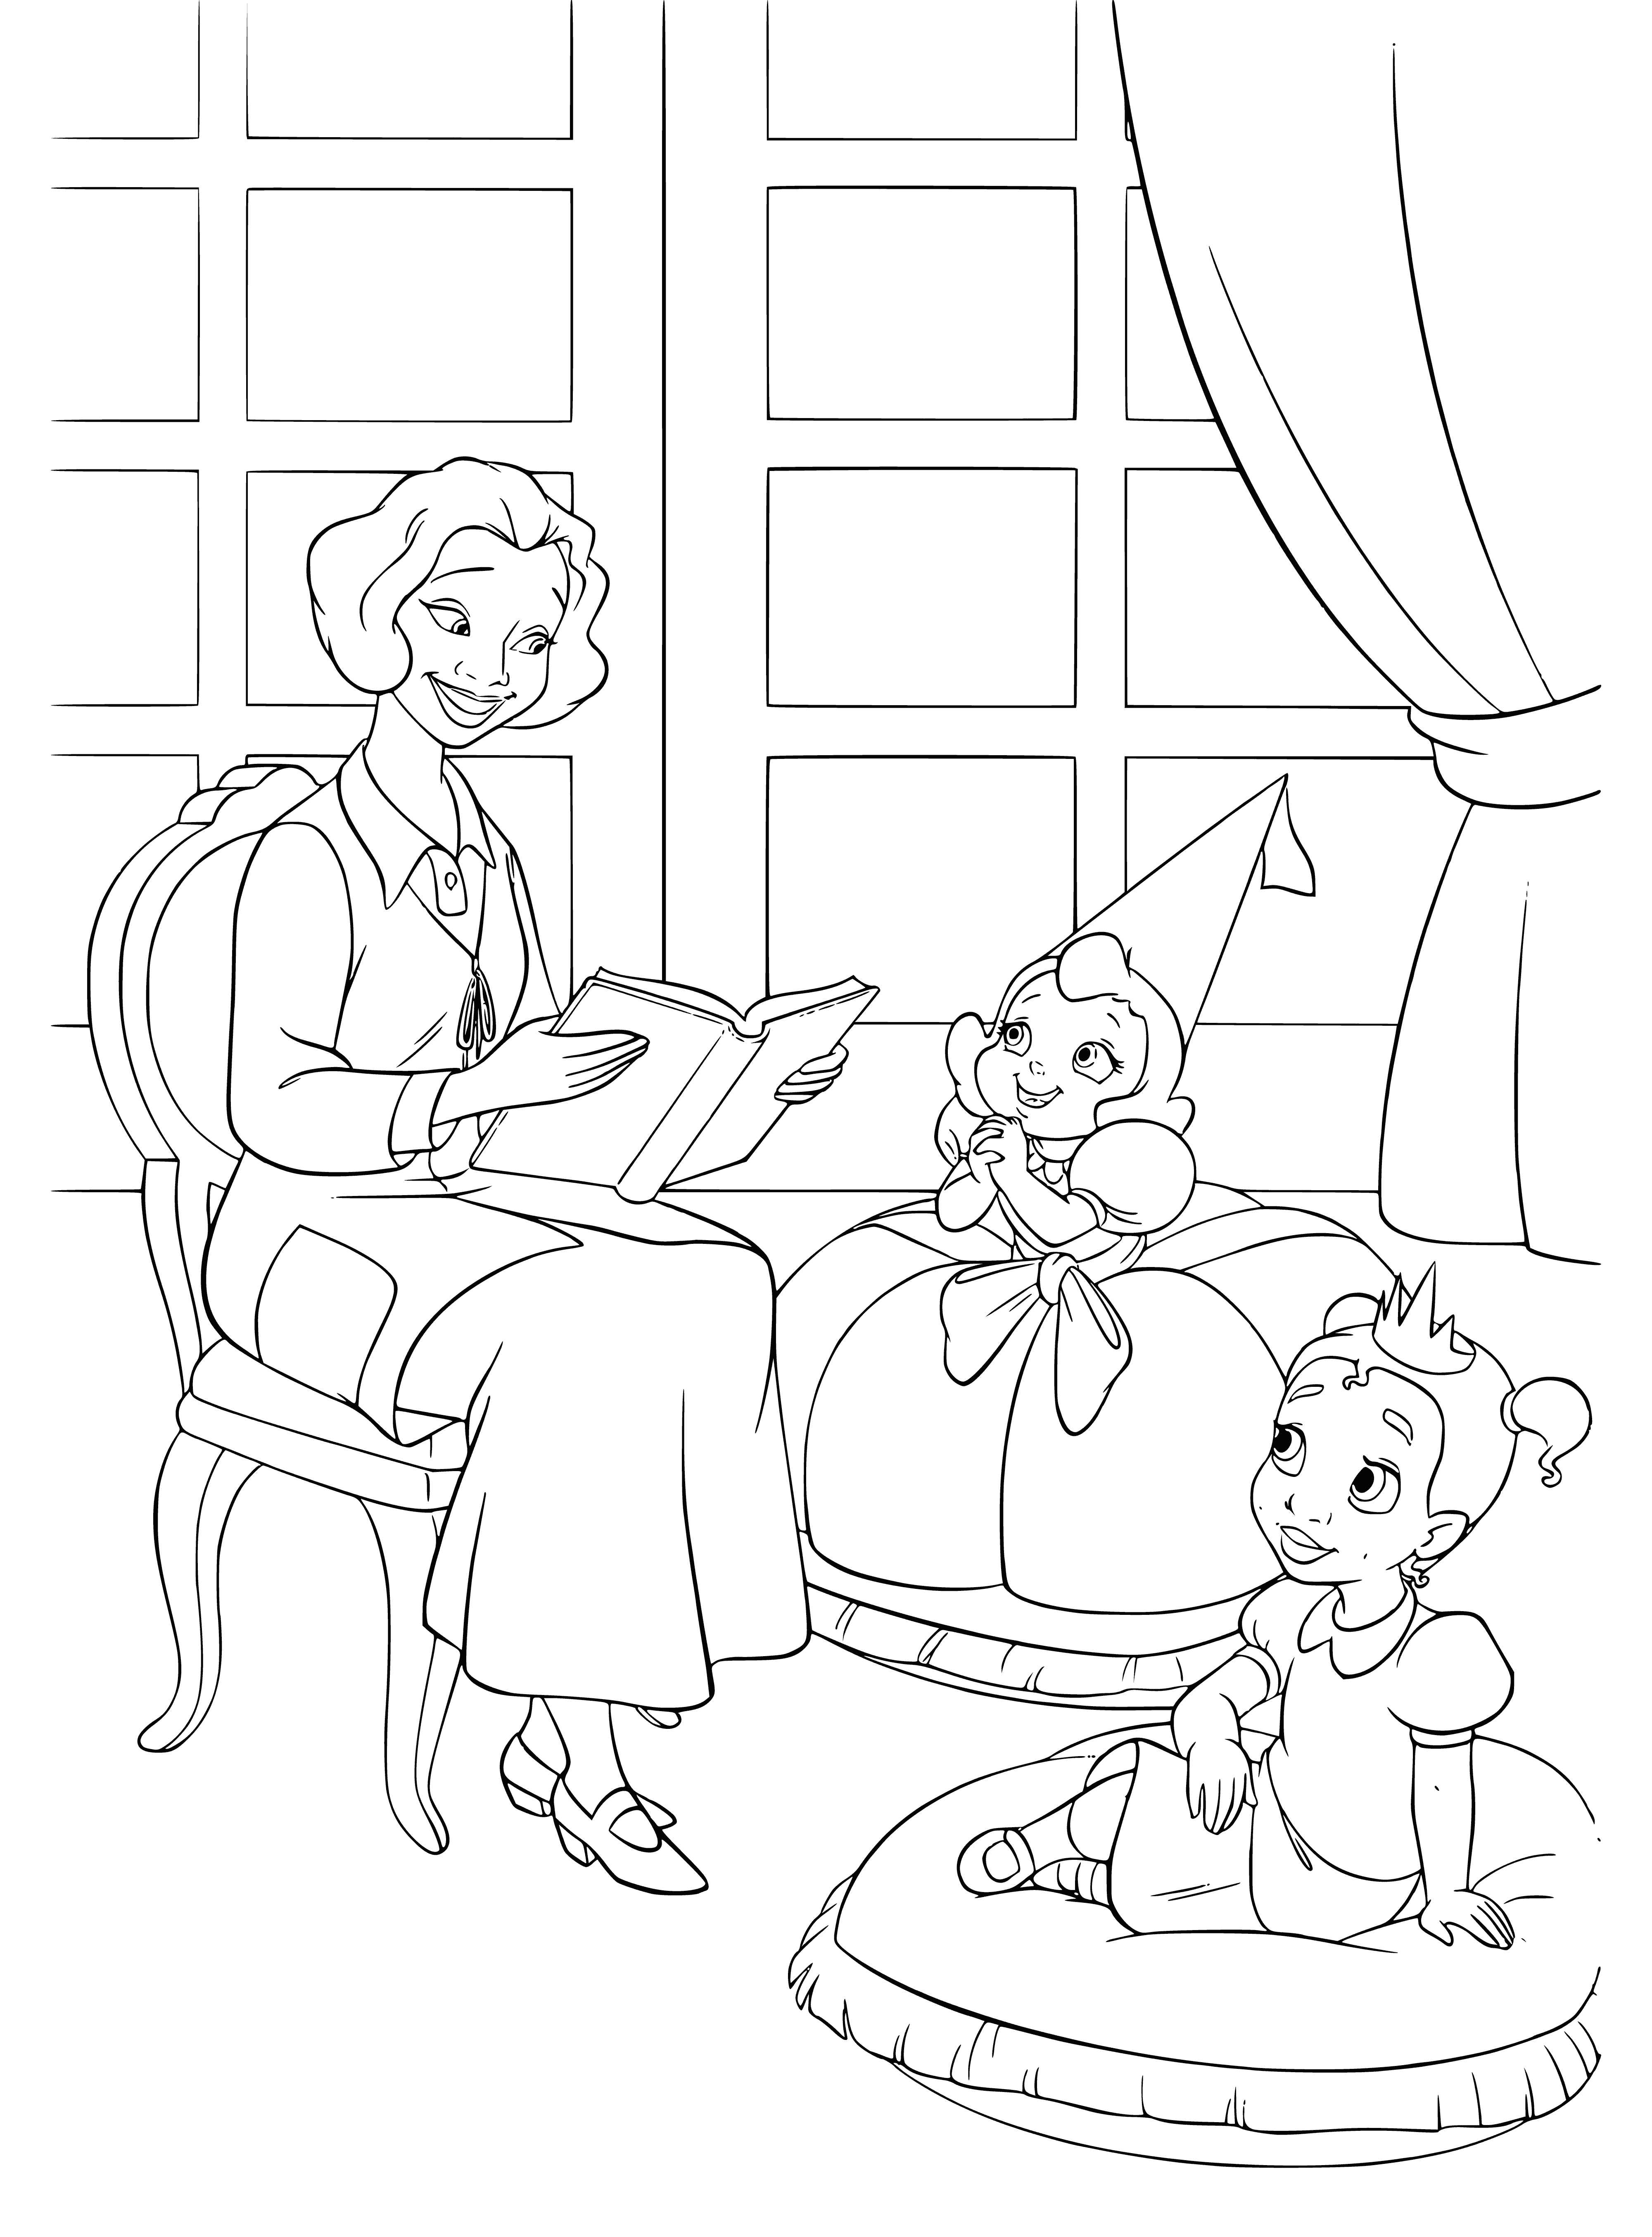 coloring page: Mom reads to 2 children, enthralled by "The Princess and the Frog."